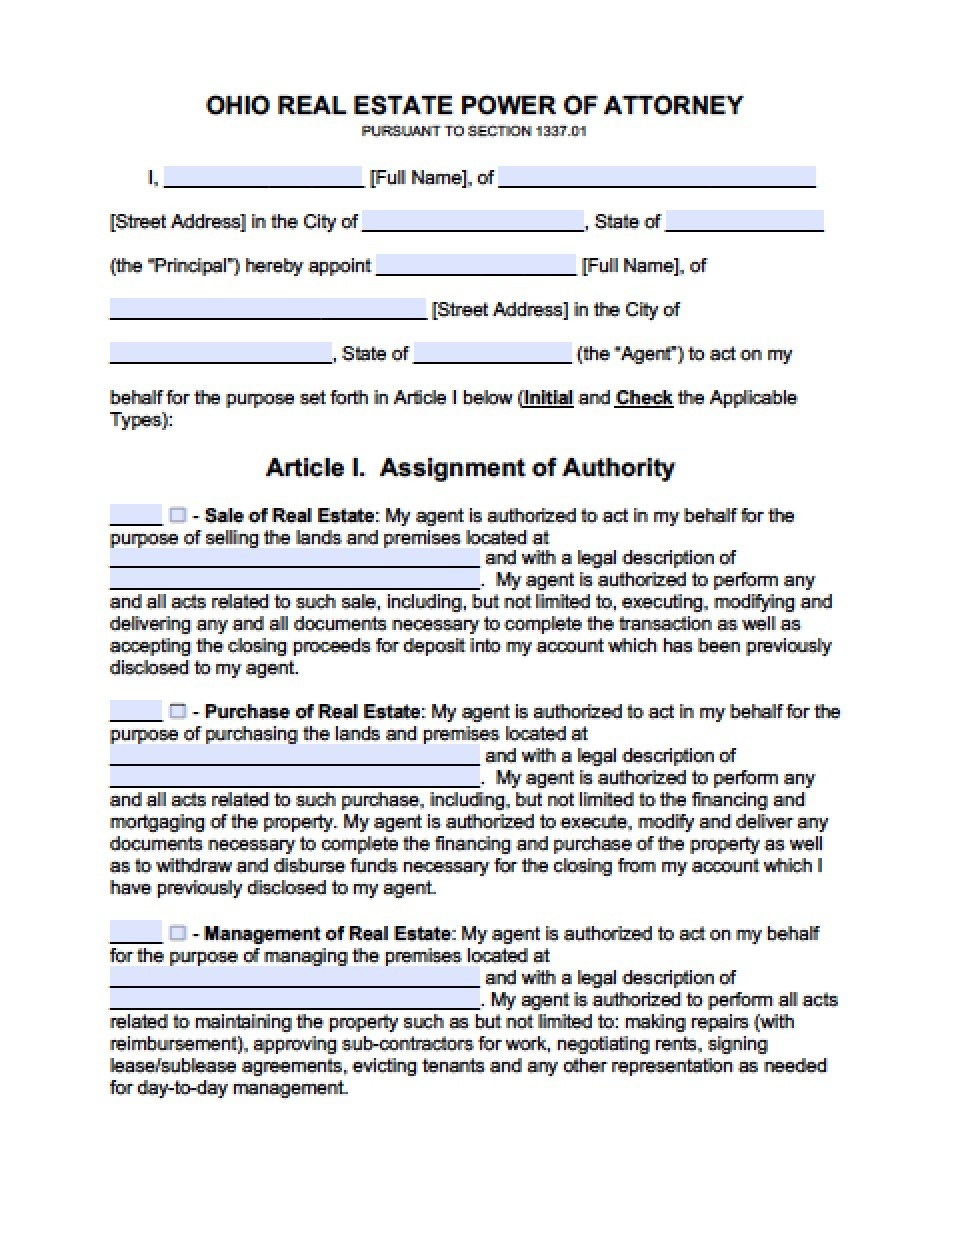 Ohio Real Estate ONLY Power Of Attorney Form Document Durable Template